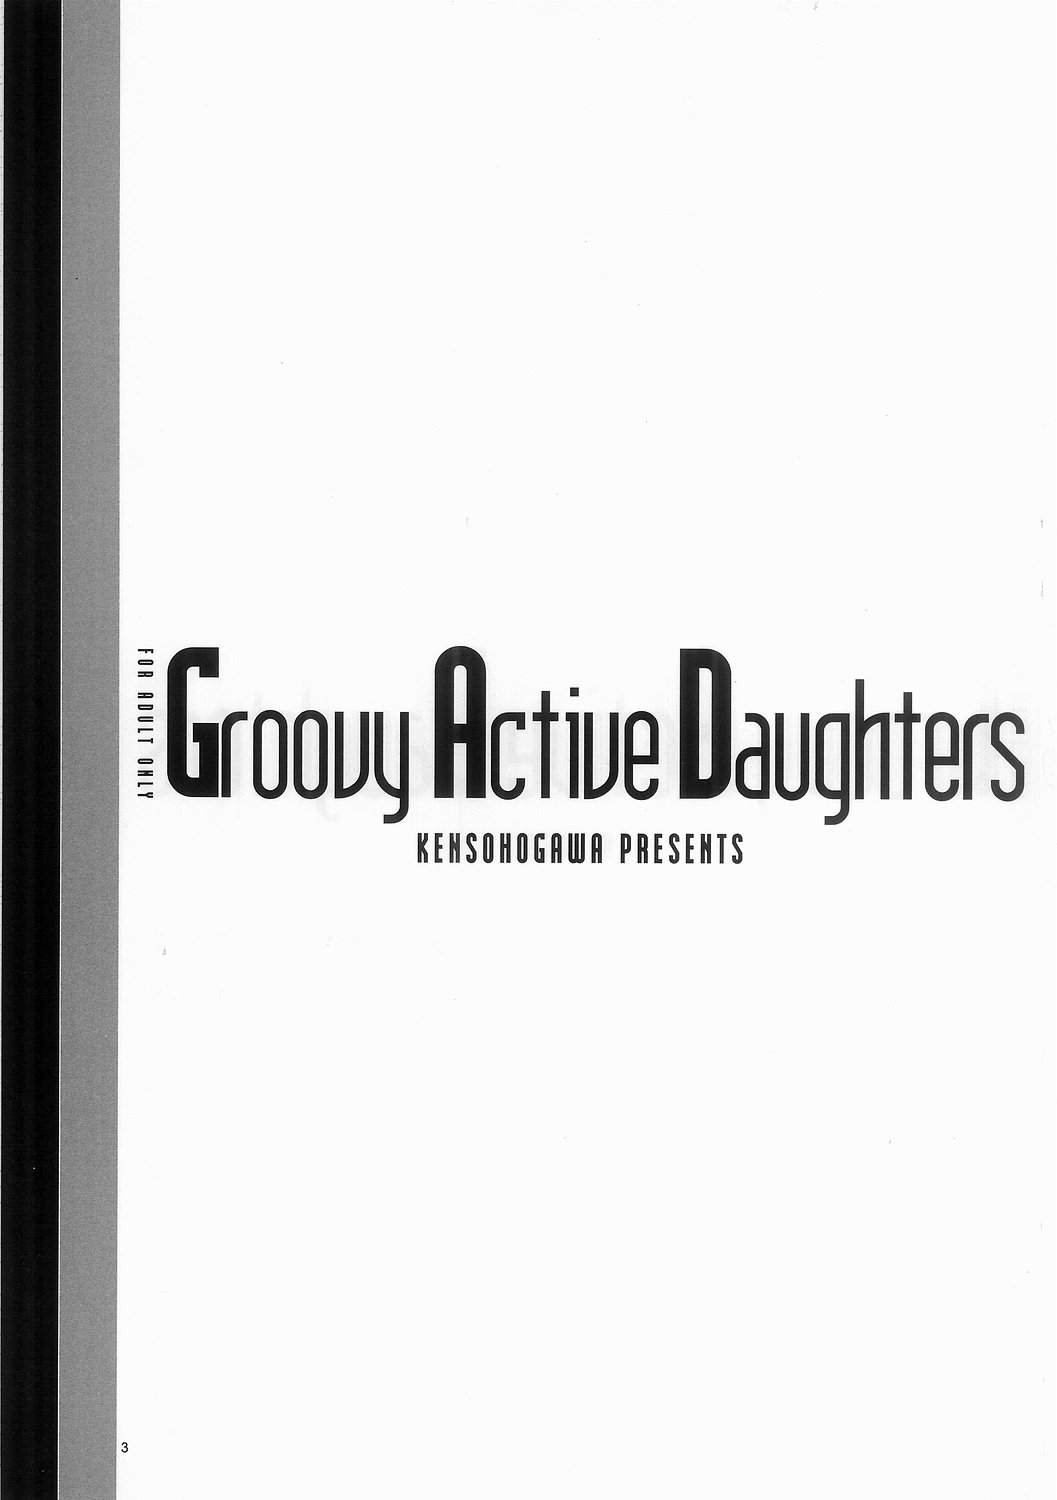 [Kensoh Ogawa] Groovy Active Daughters (Gad Guard)(C65) 